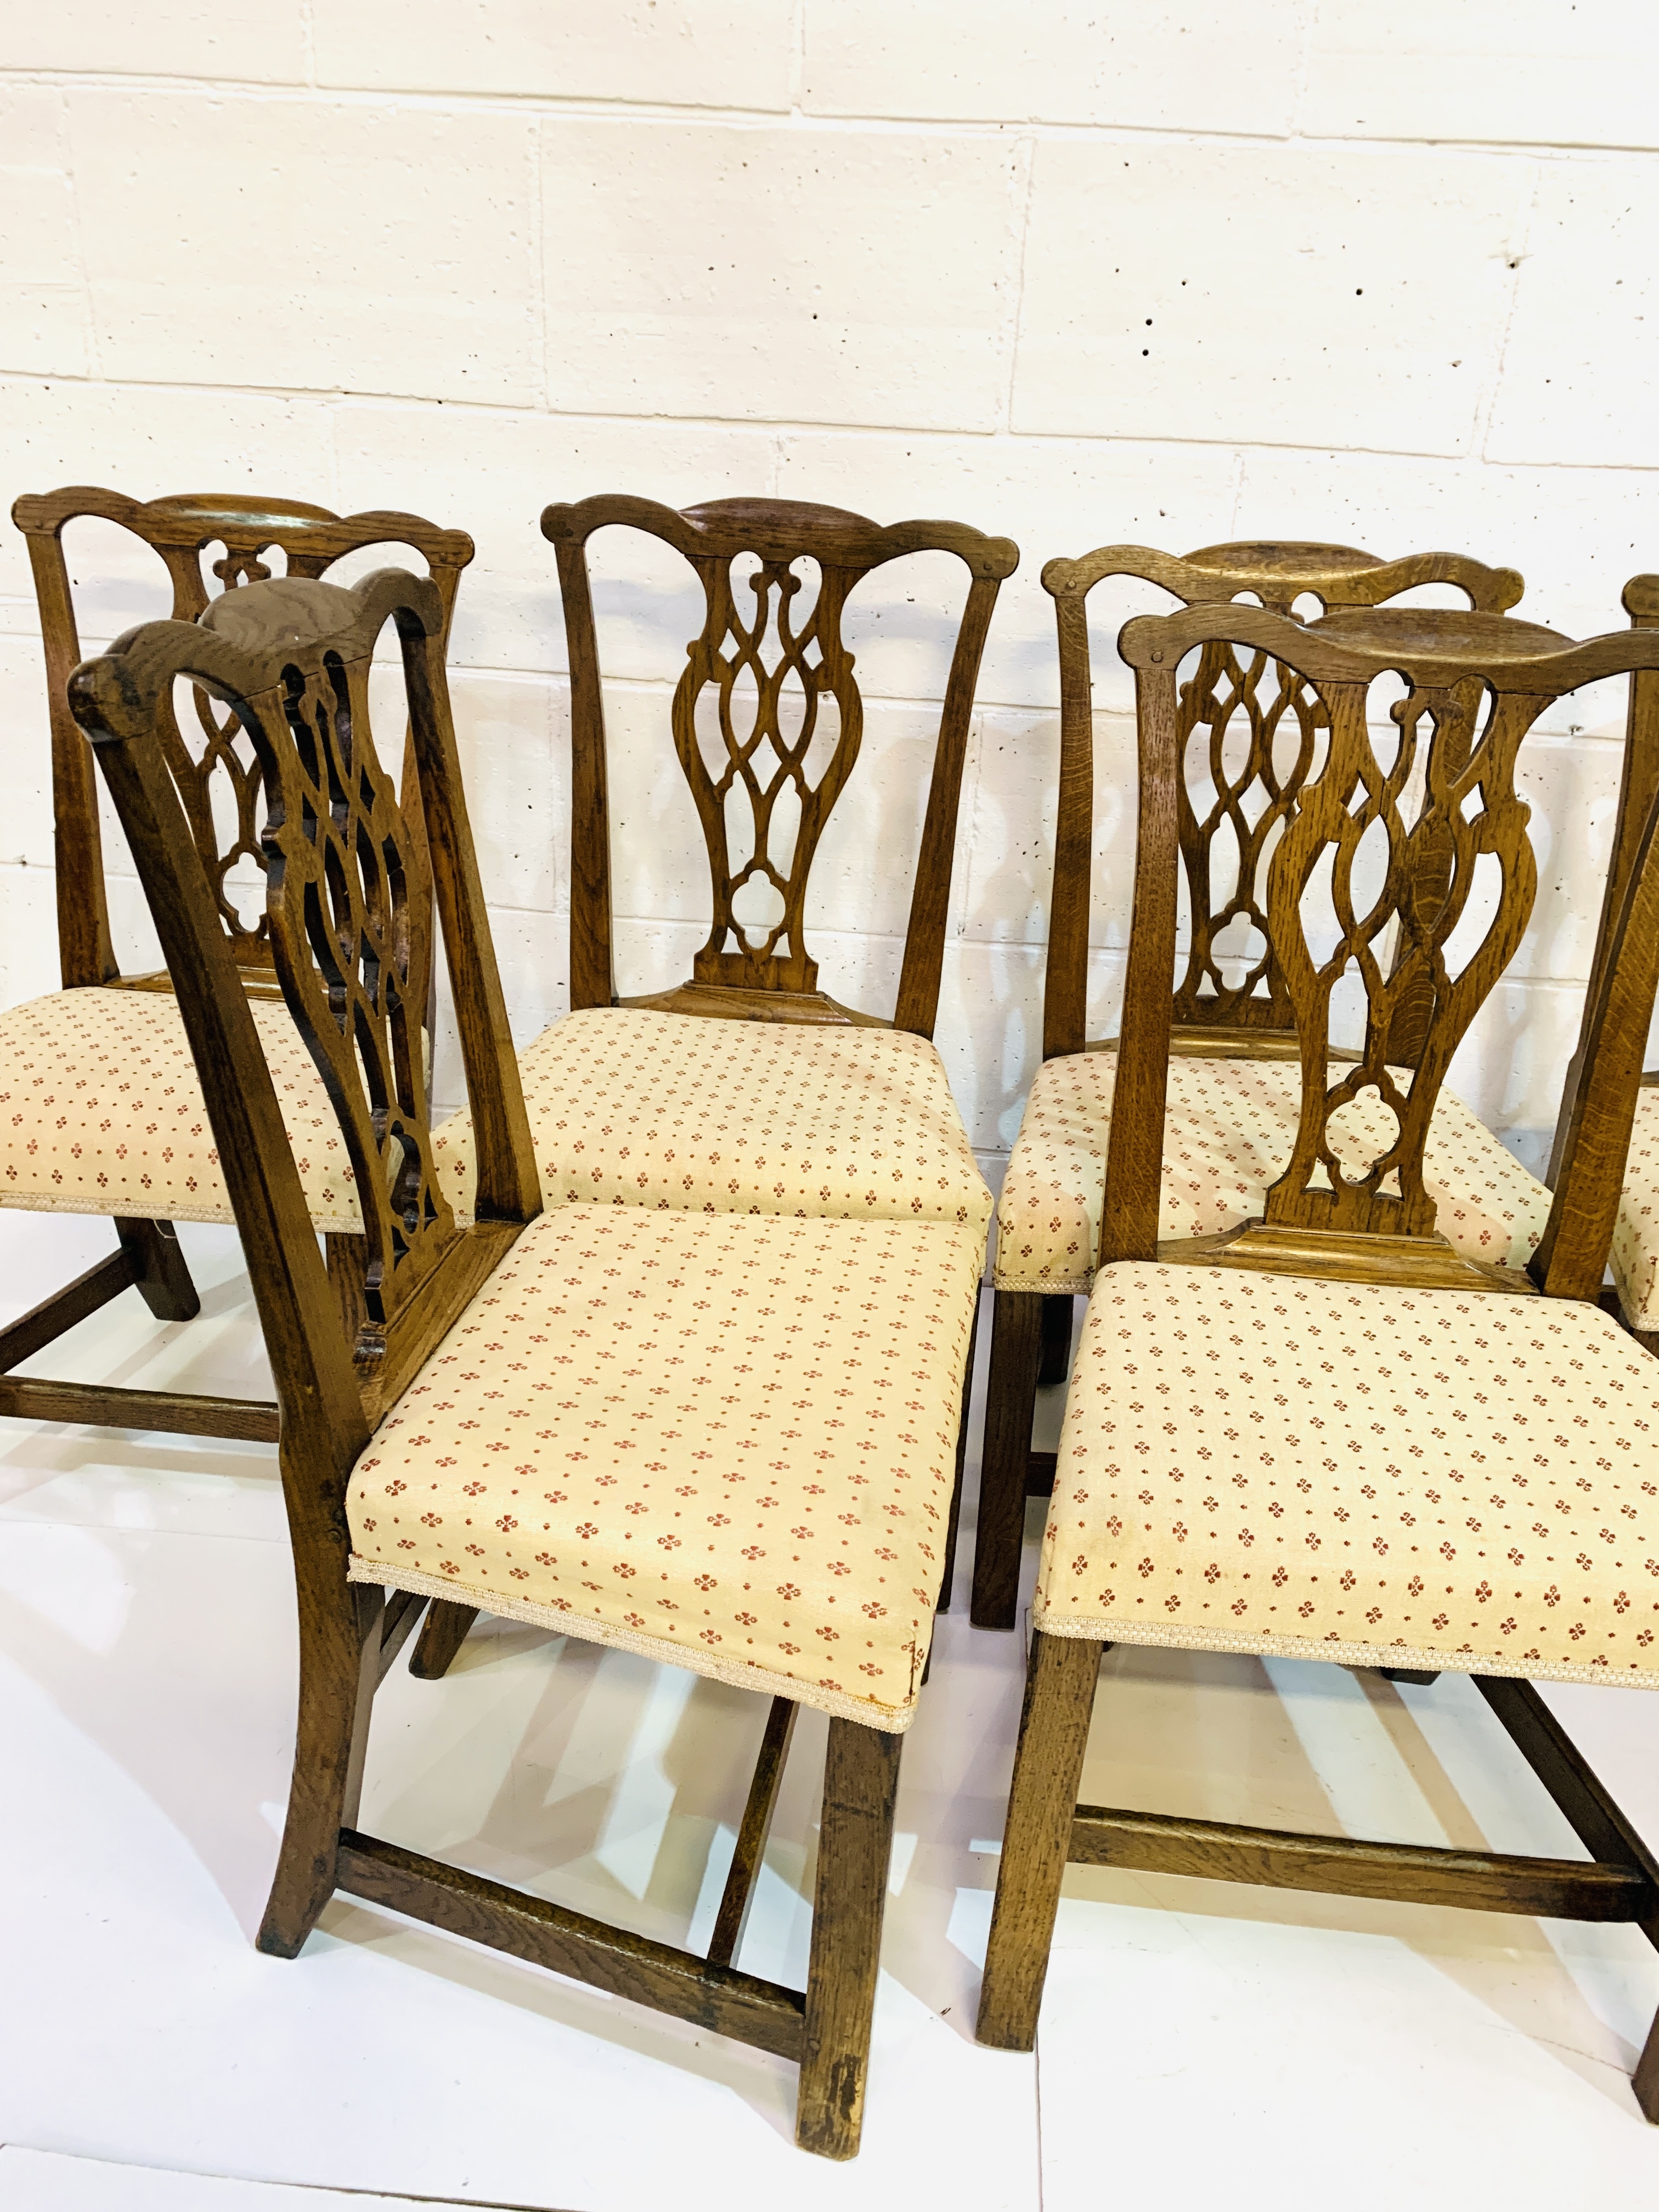 Group of six 19th century mahogany framed Chippendale style chairs - Image 4 of 5